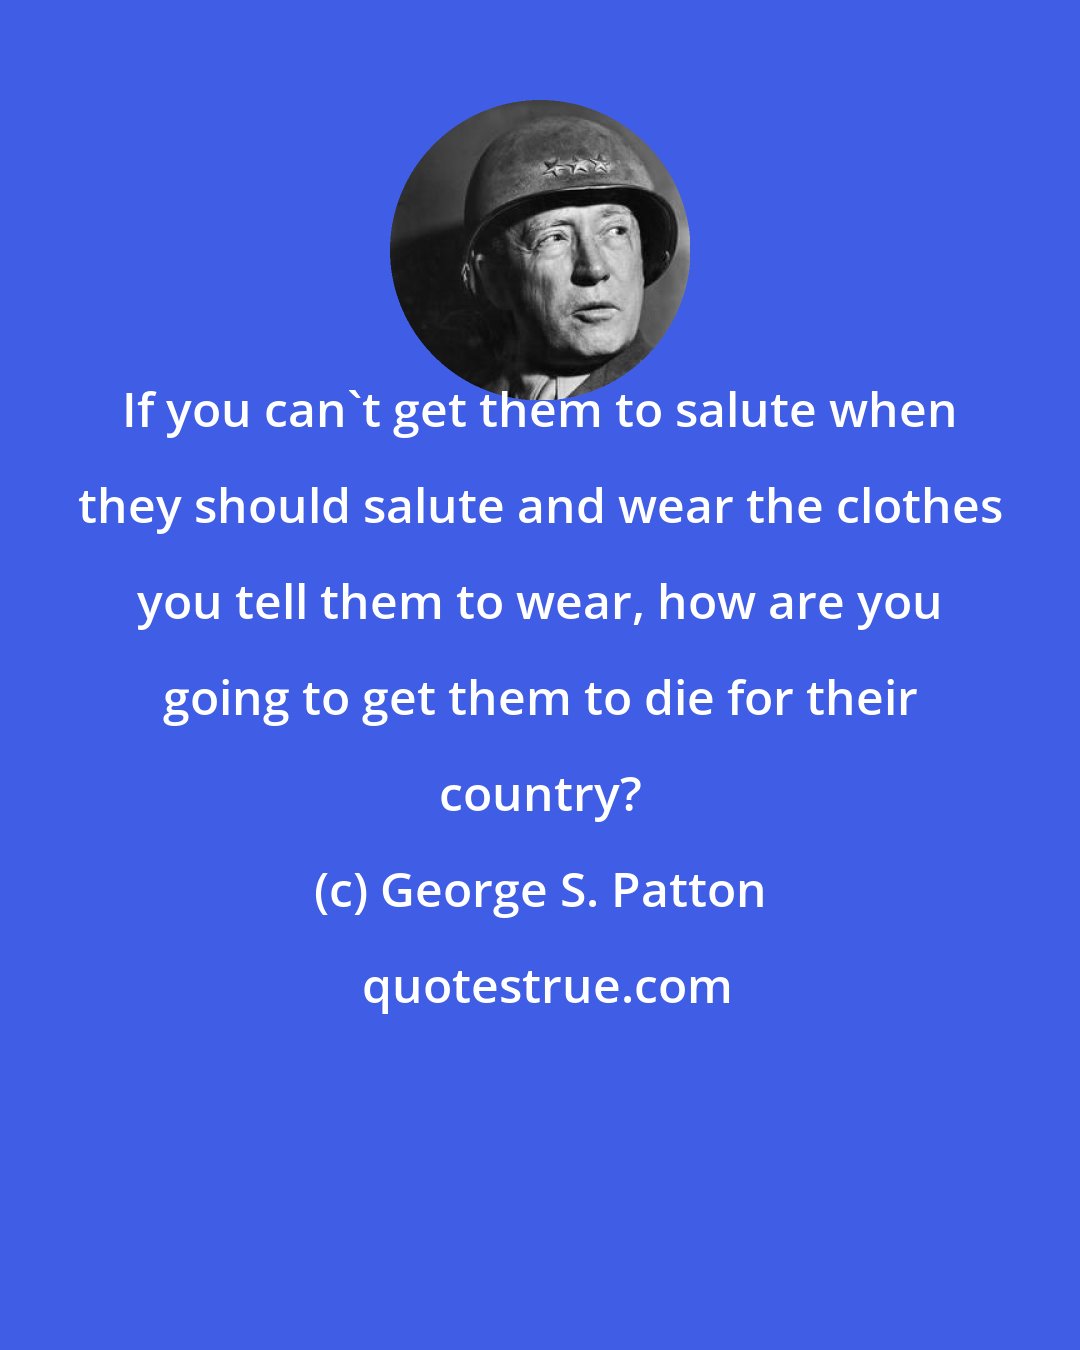 George S. Patton: If you can't get them to salute when they should salute and wear the clothes you tell them to wear, how are you going to get them to die for their country?